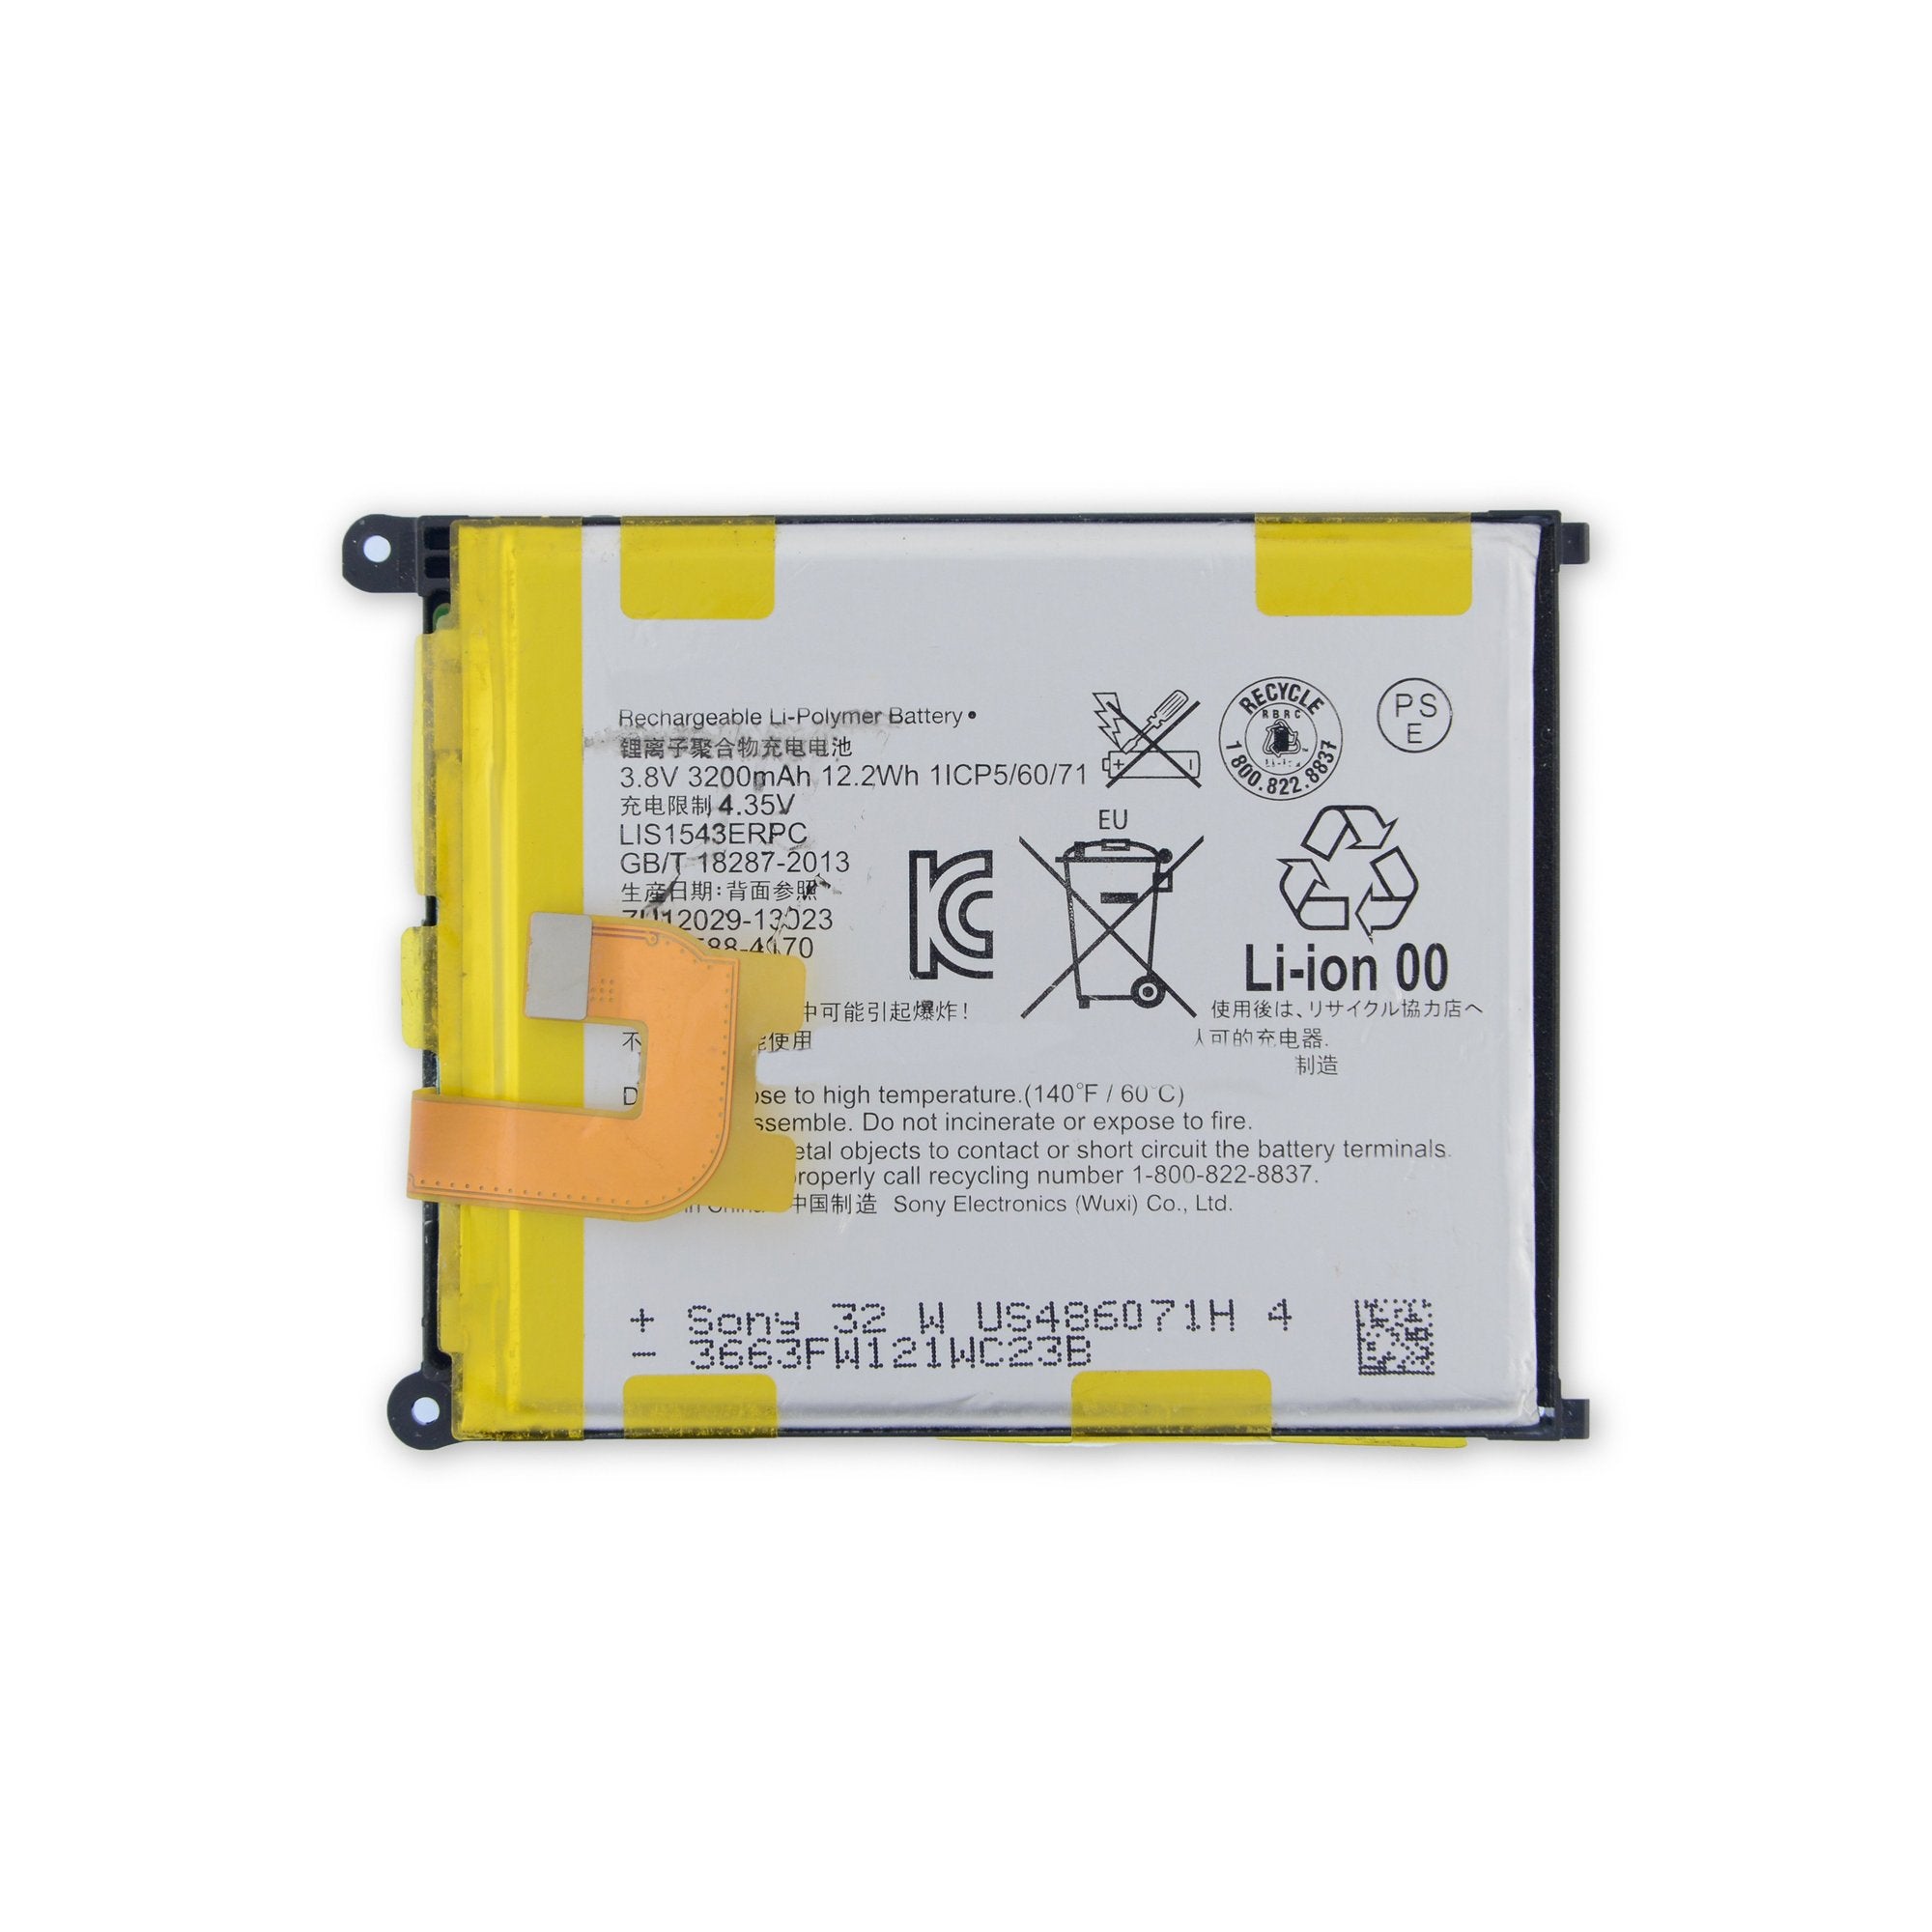 Sony Xperia Z2 Battery New Part Only